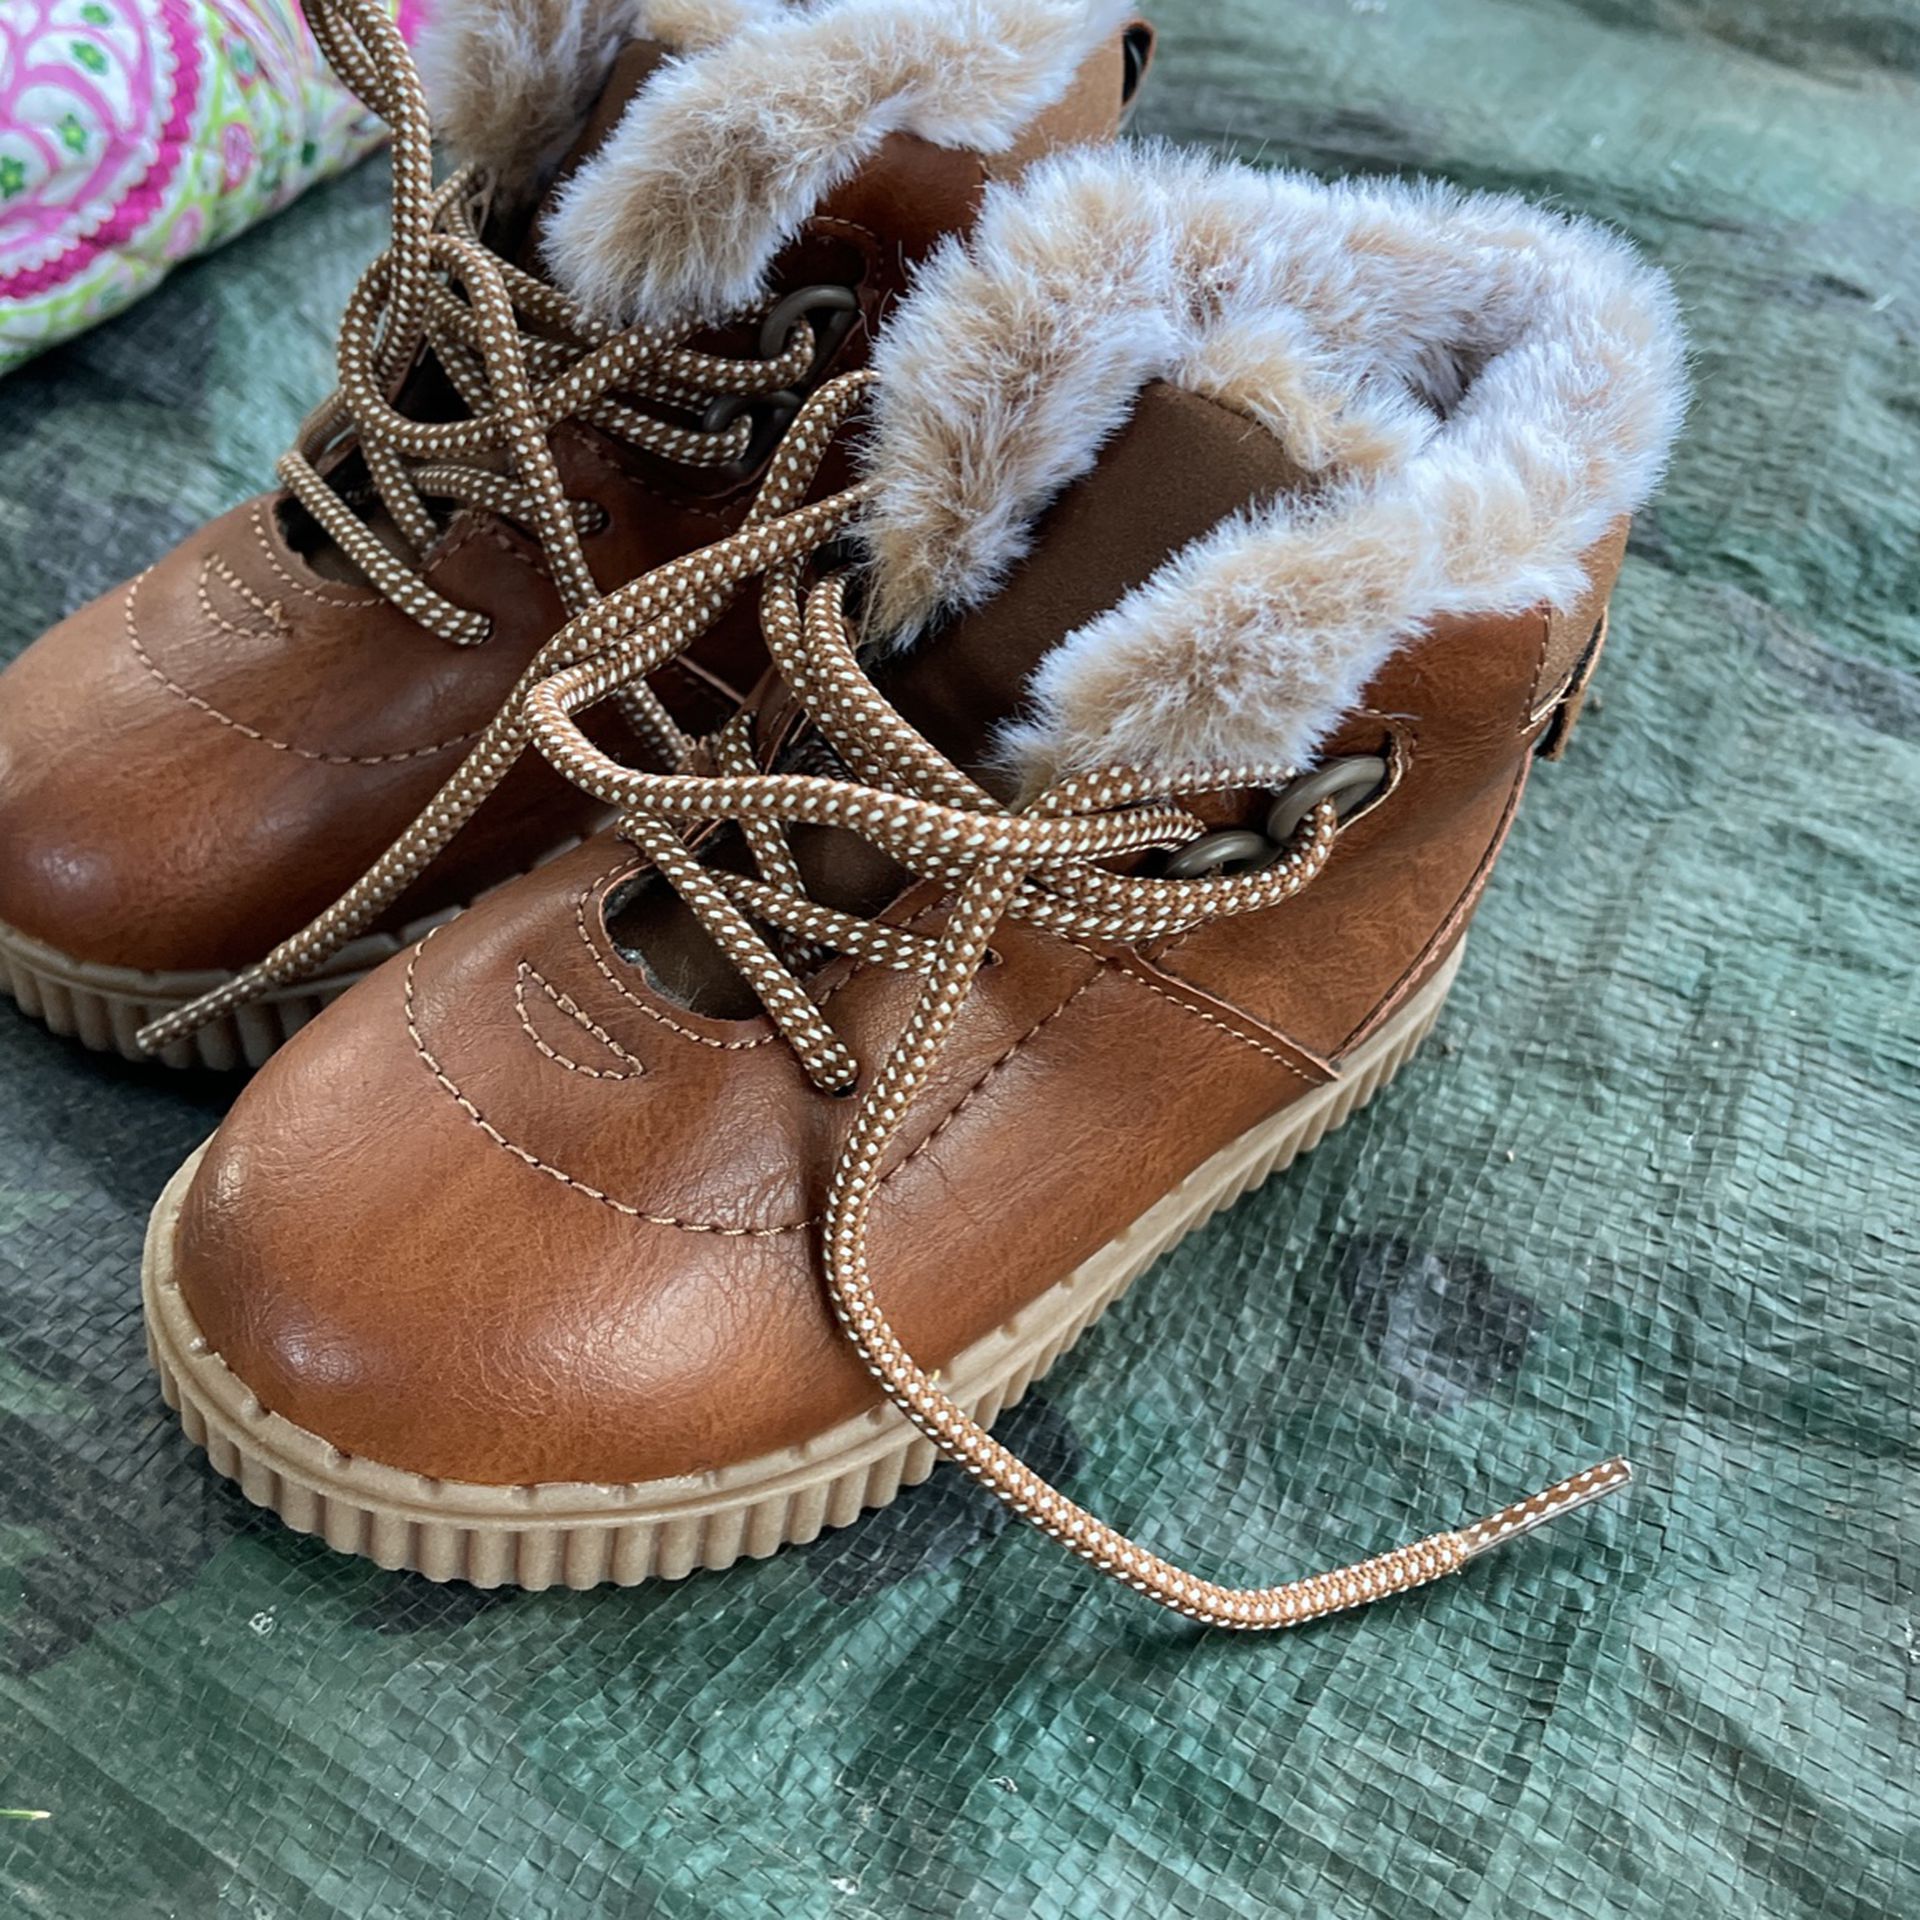 Shoes size 9 toddlers. Please Read Post.